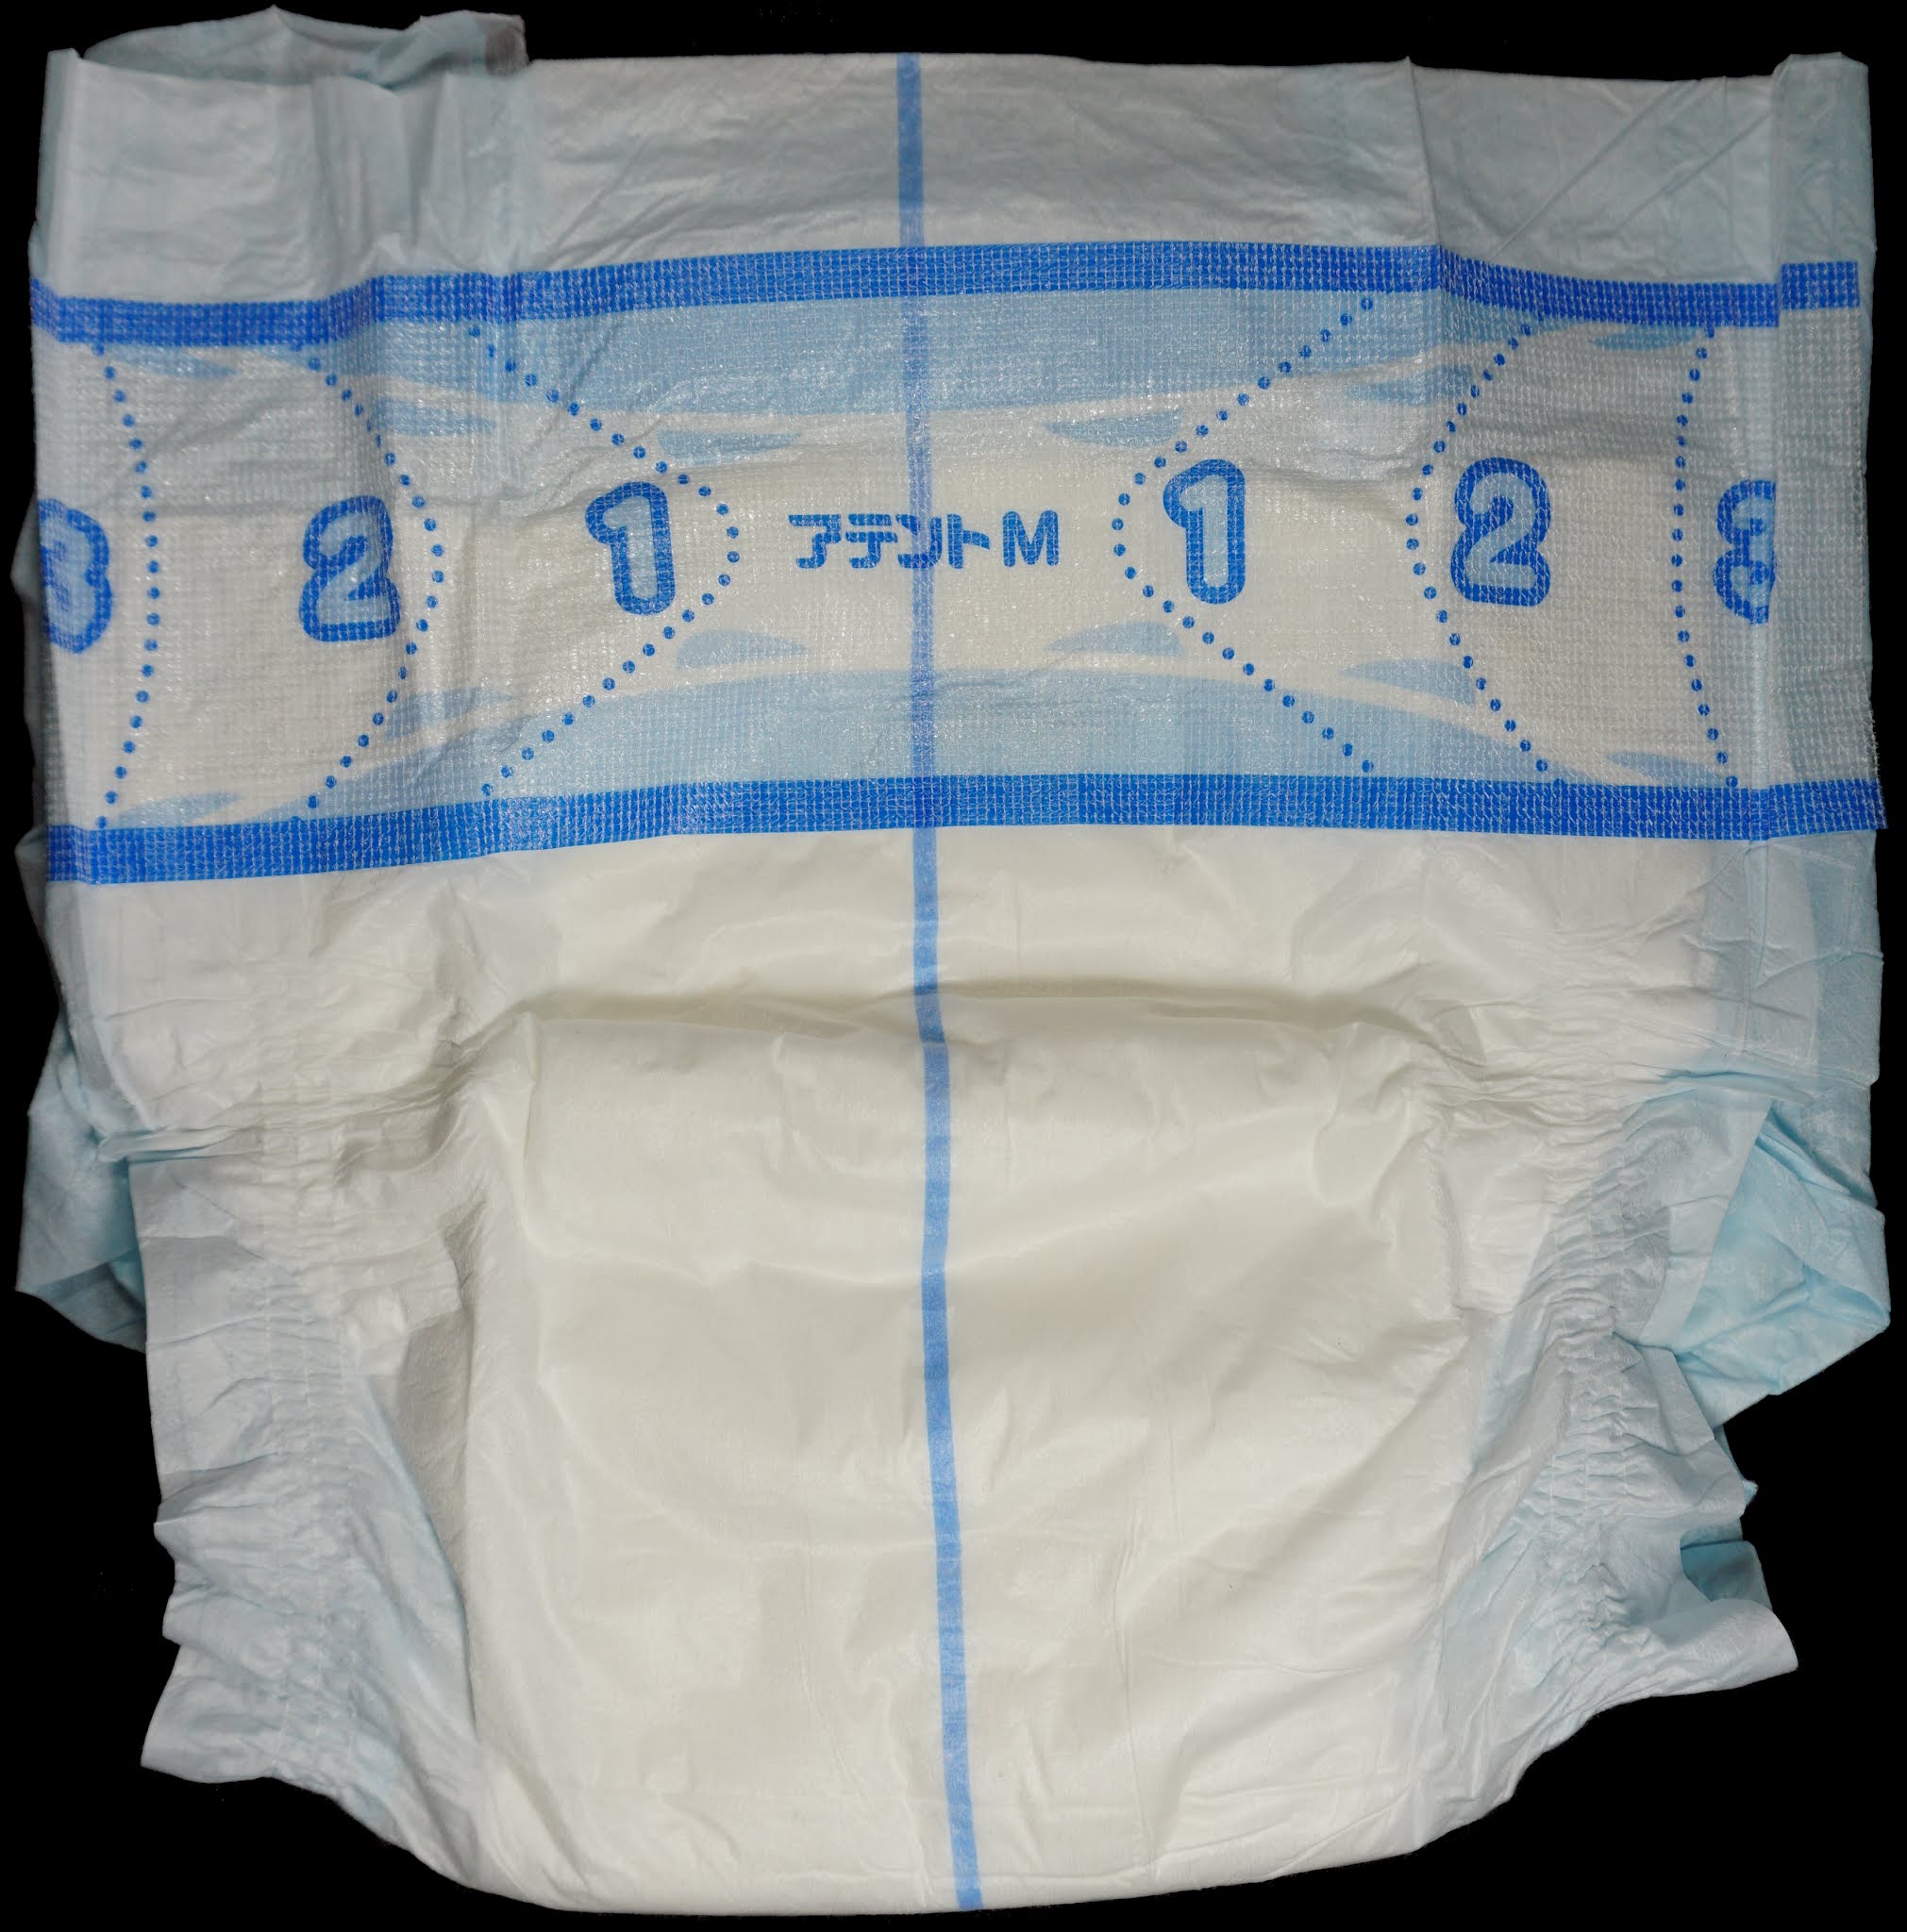 Diaper Metrics Attento Tape-Style Adult Diaper Review pic